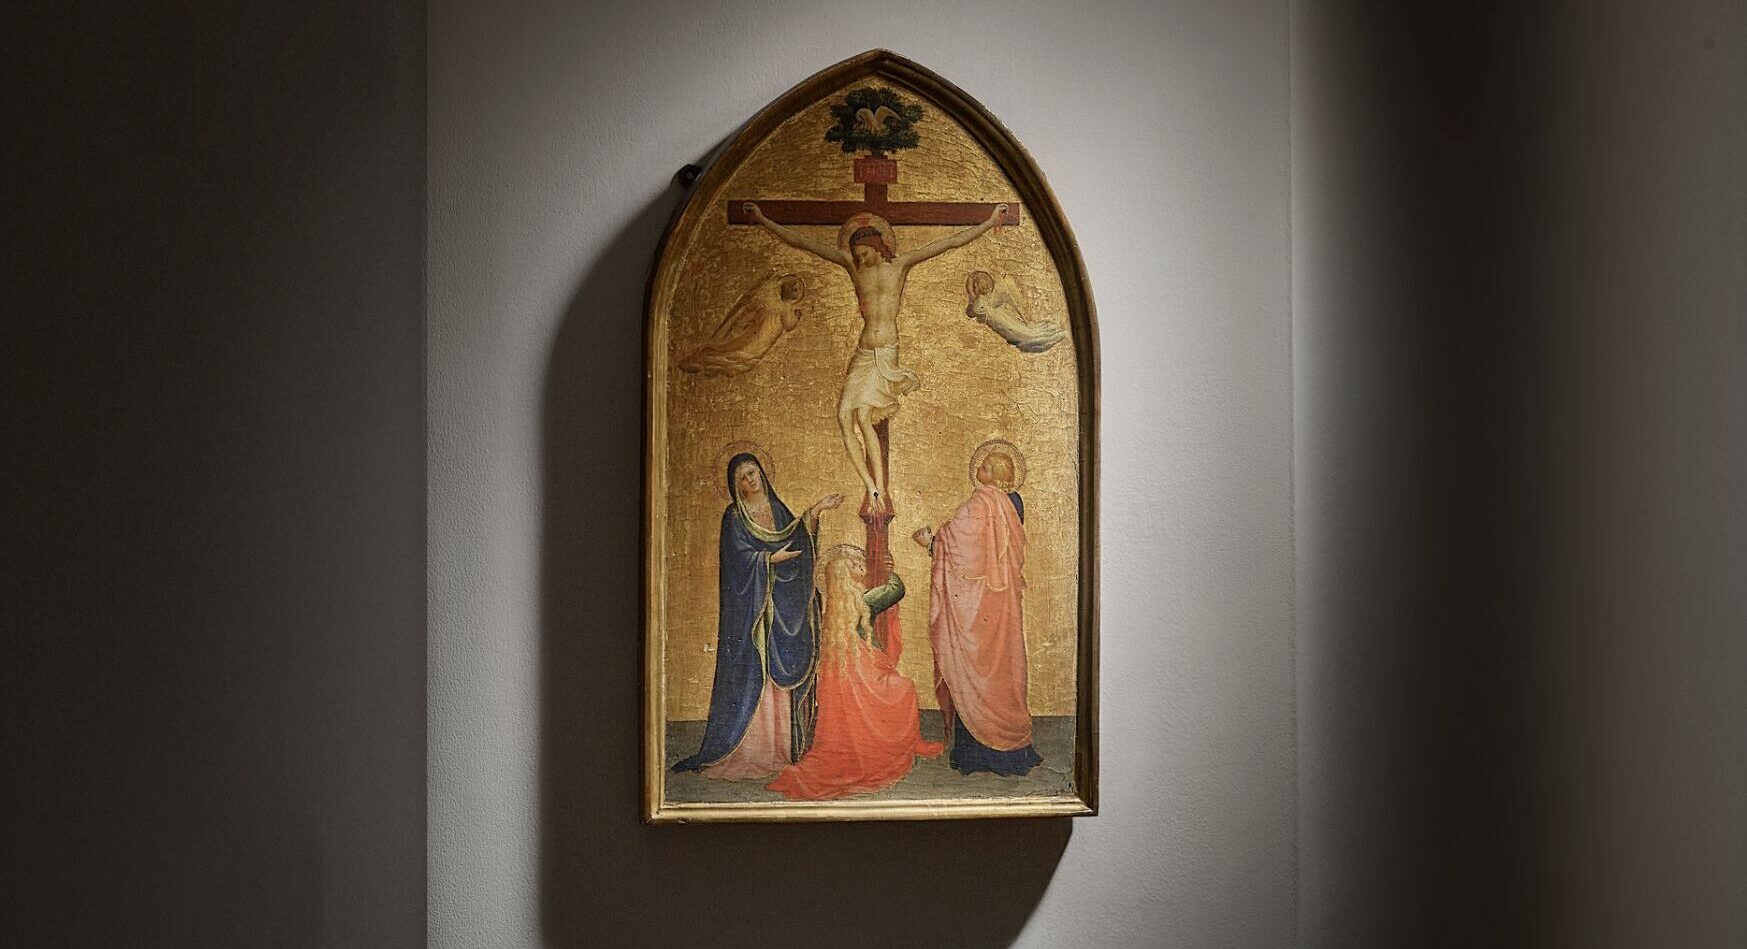 Fra Angelico’s Rare Crucifixion Painting Auctioned at Record Price